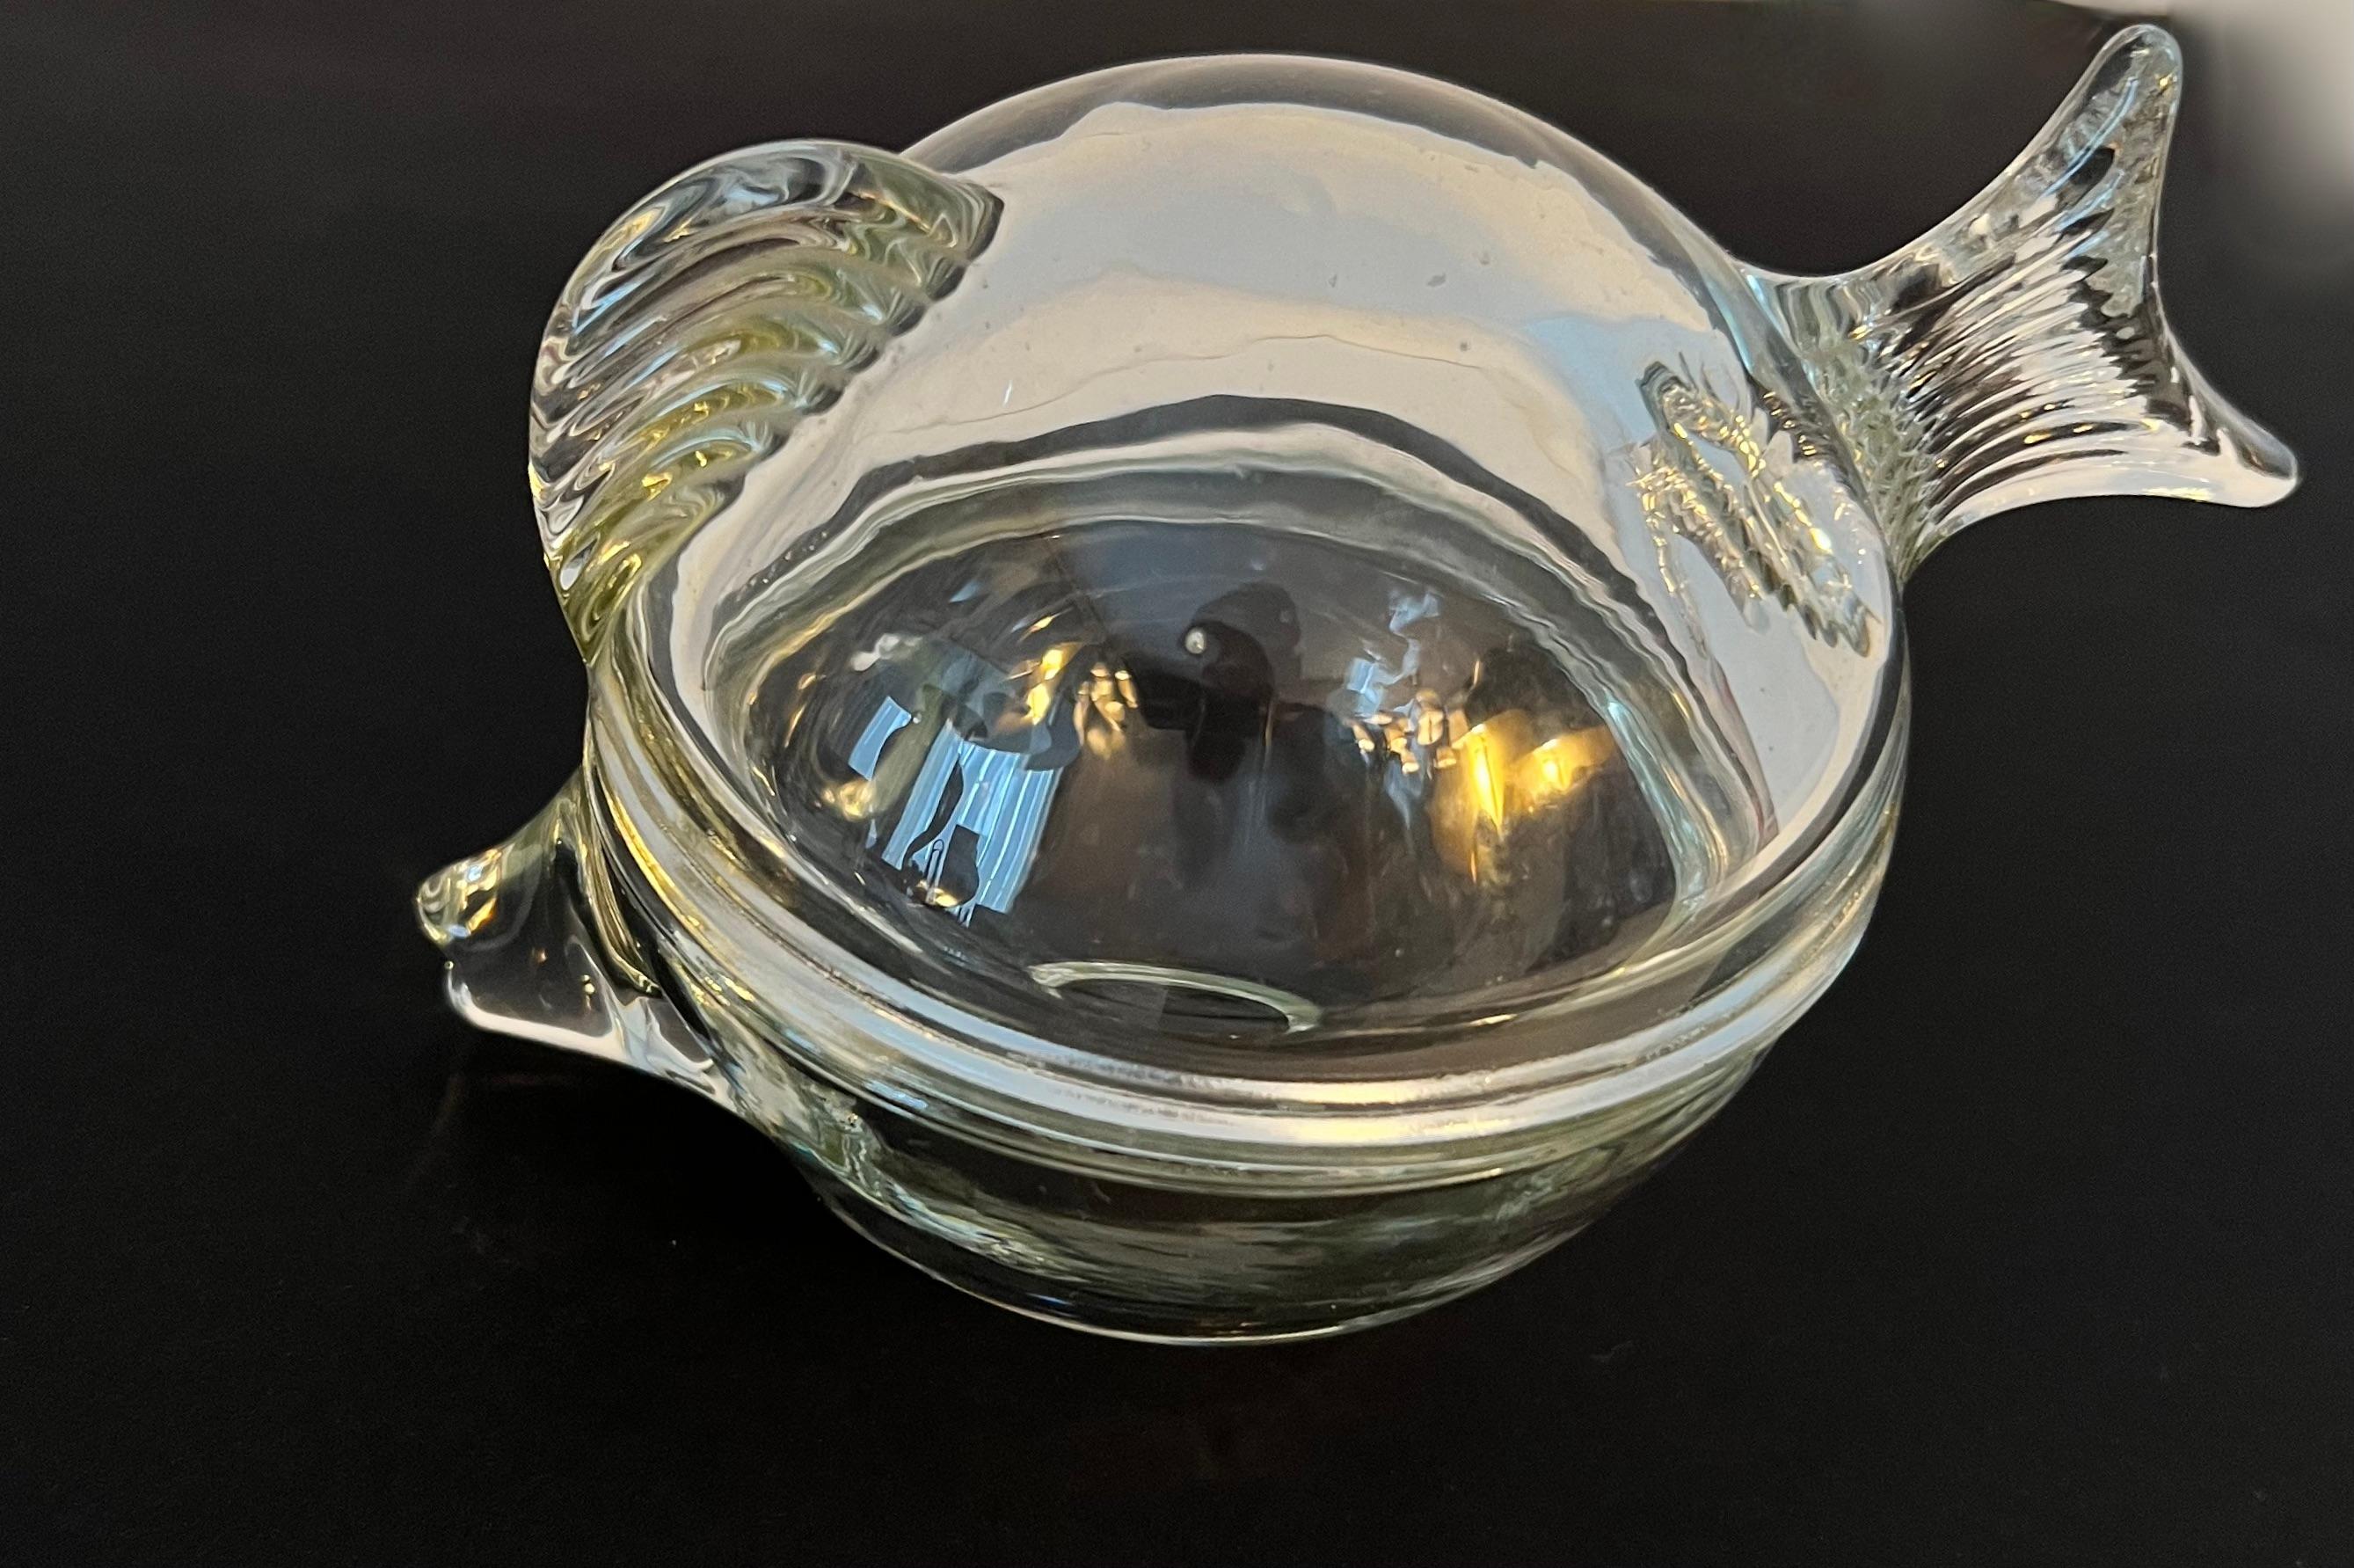 20th Century Lidded Glass Box in the Shape of a Fish with Fin and Tail